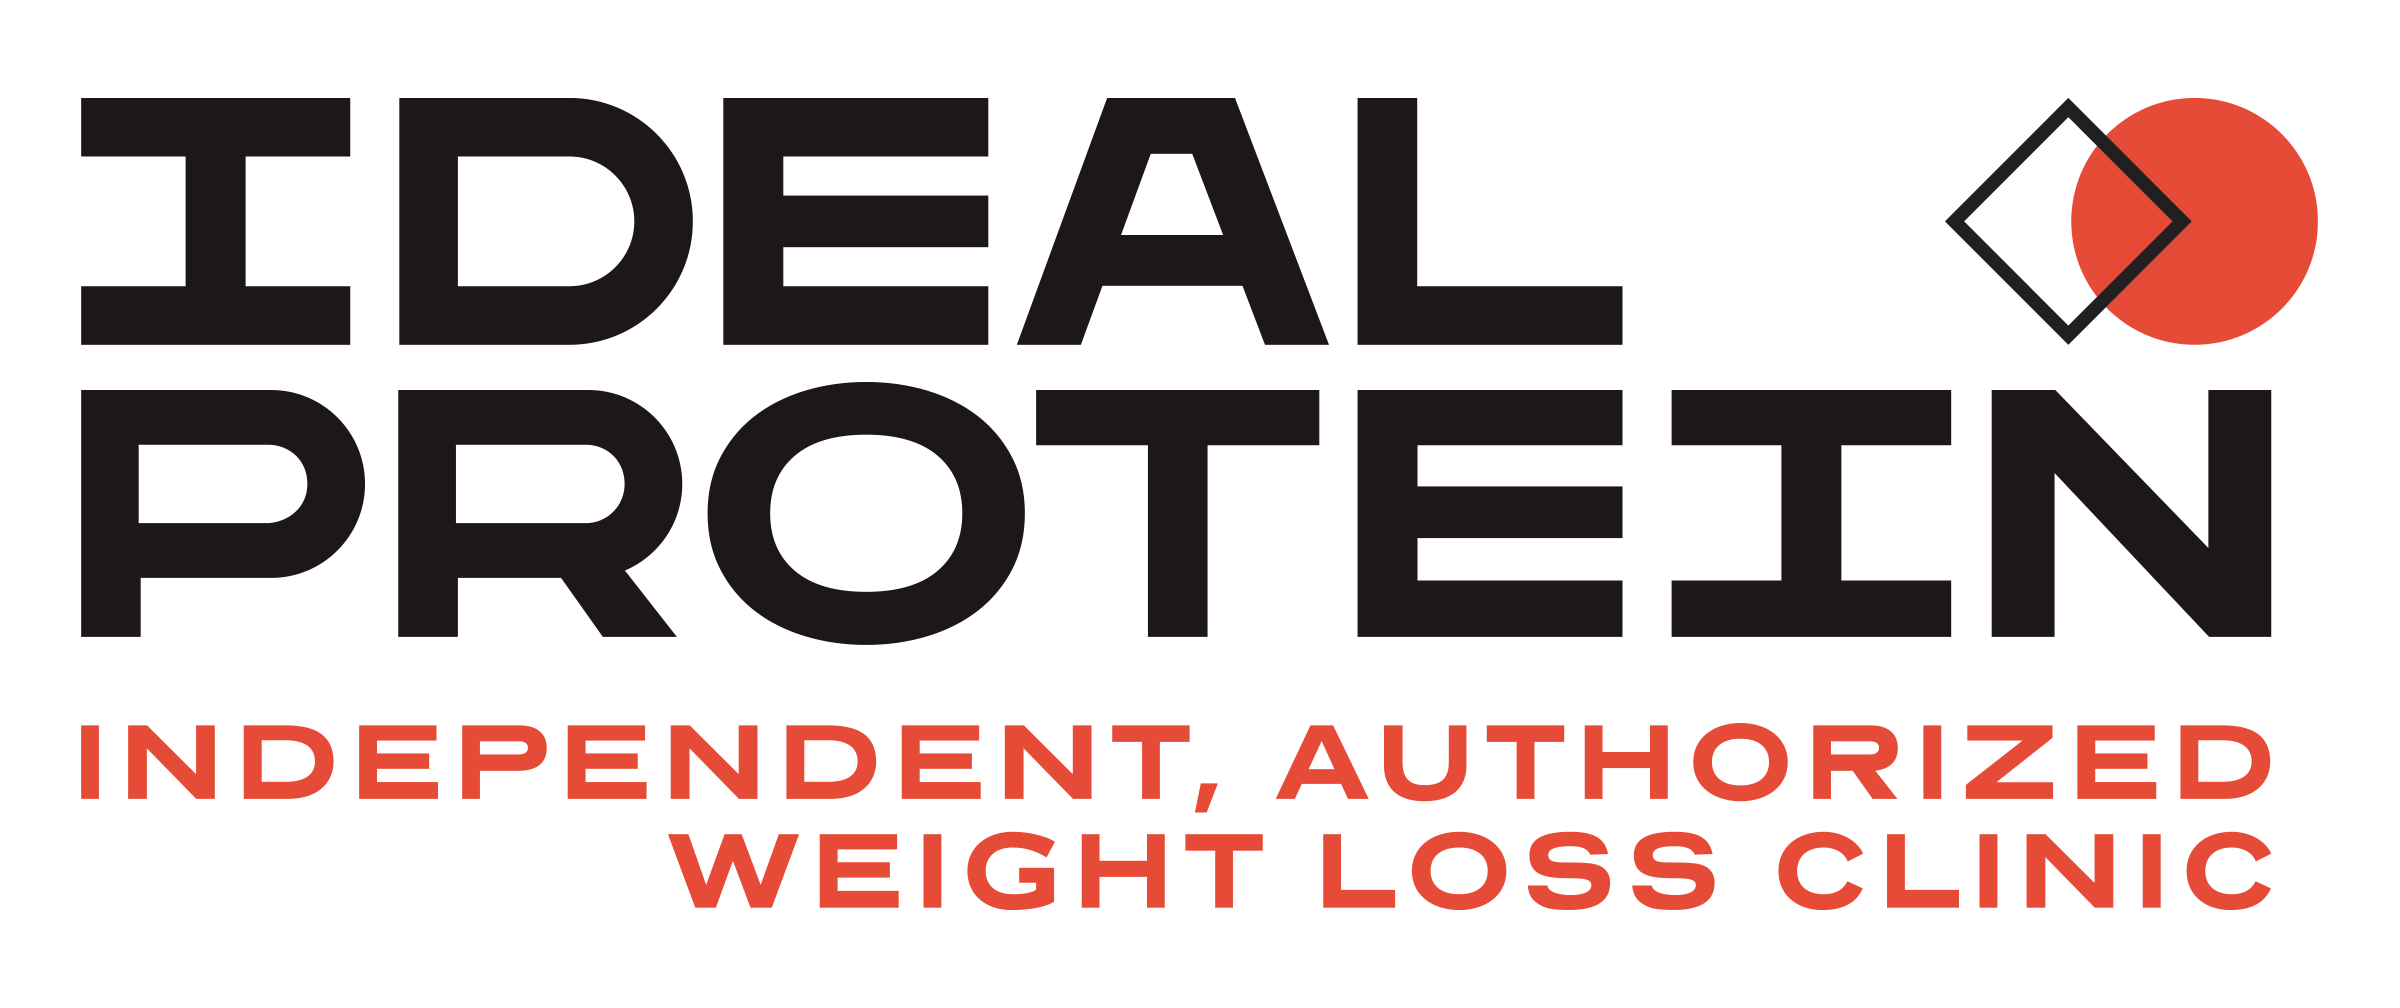 Ideal Protein Weight Loss Clinic